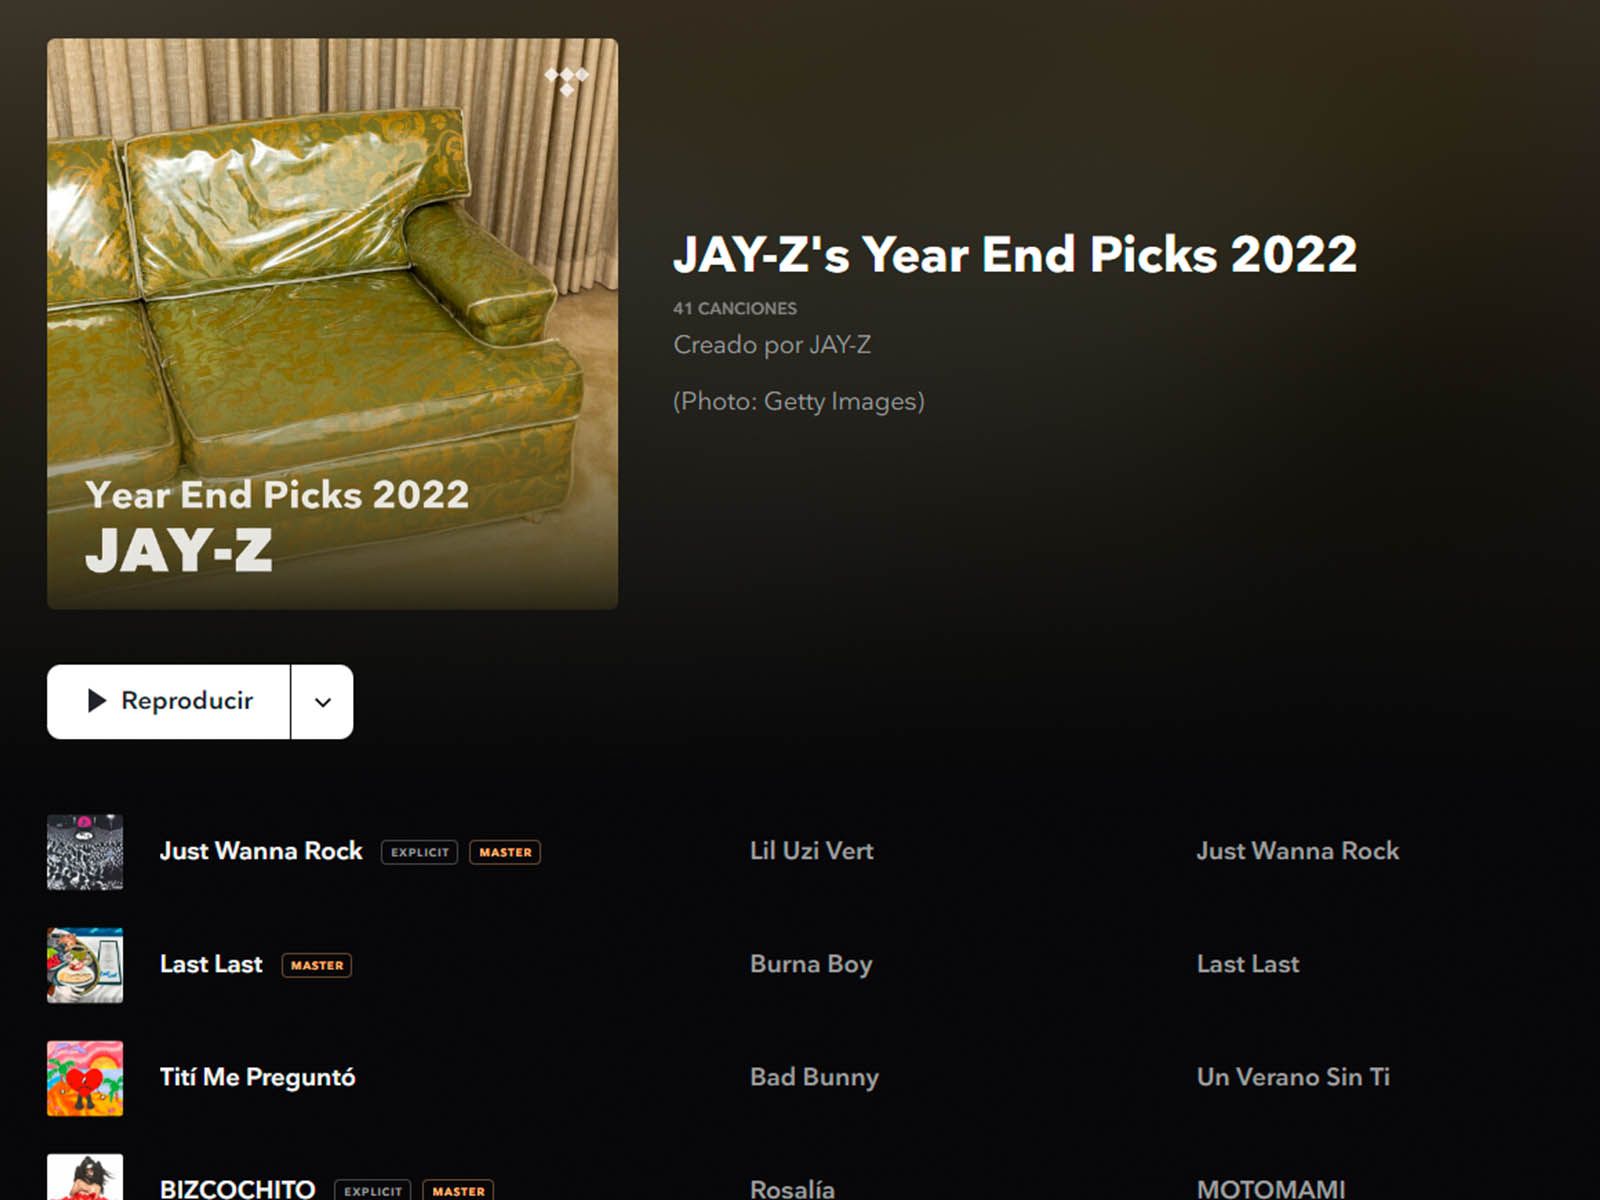 These are the artists that Jay-Z has added to his end-of-year playlist